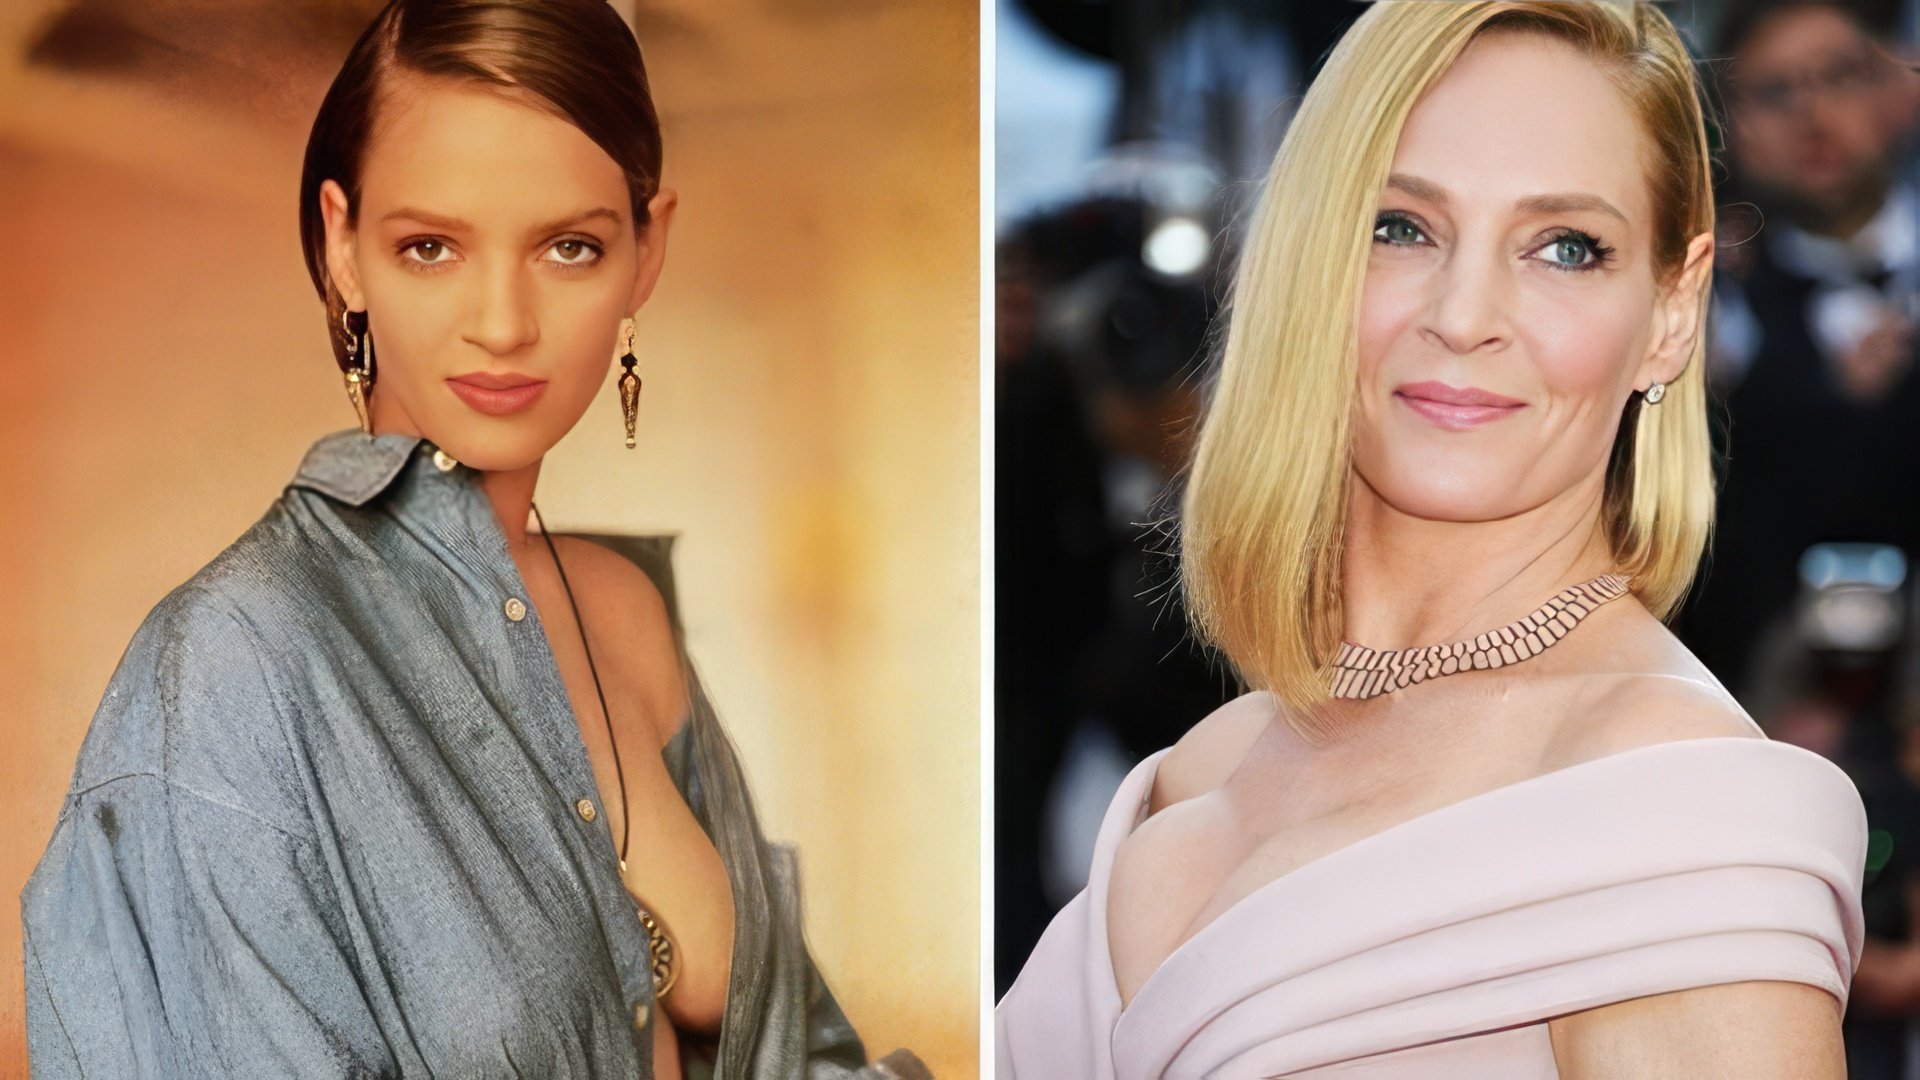 Uma Thurman: then and now